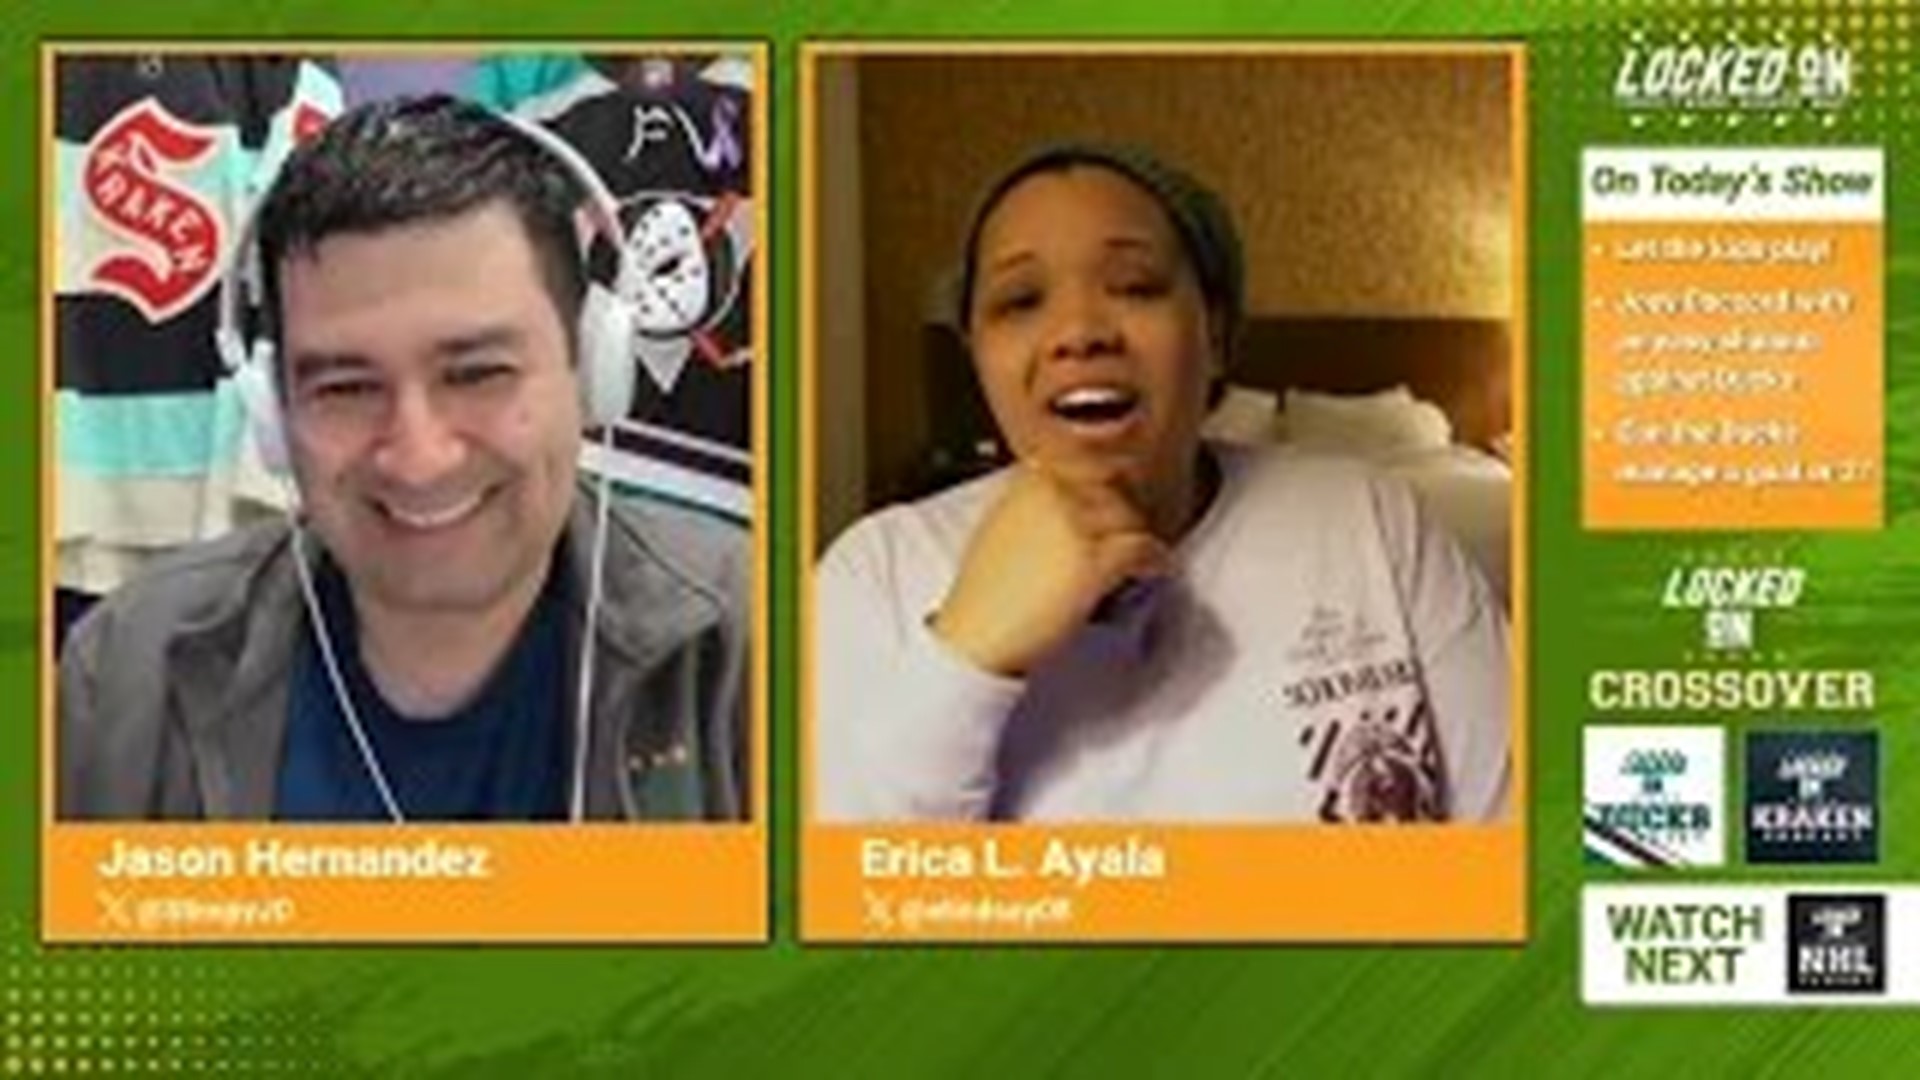 JD Hernandez and Erica L. Ayala are back to talk more about the last game between the Anaheim Ducks and Seattle Kraken.